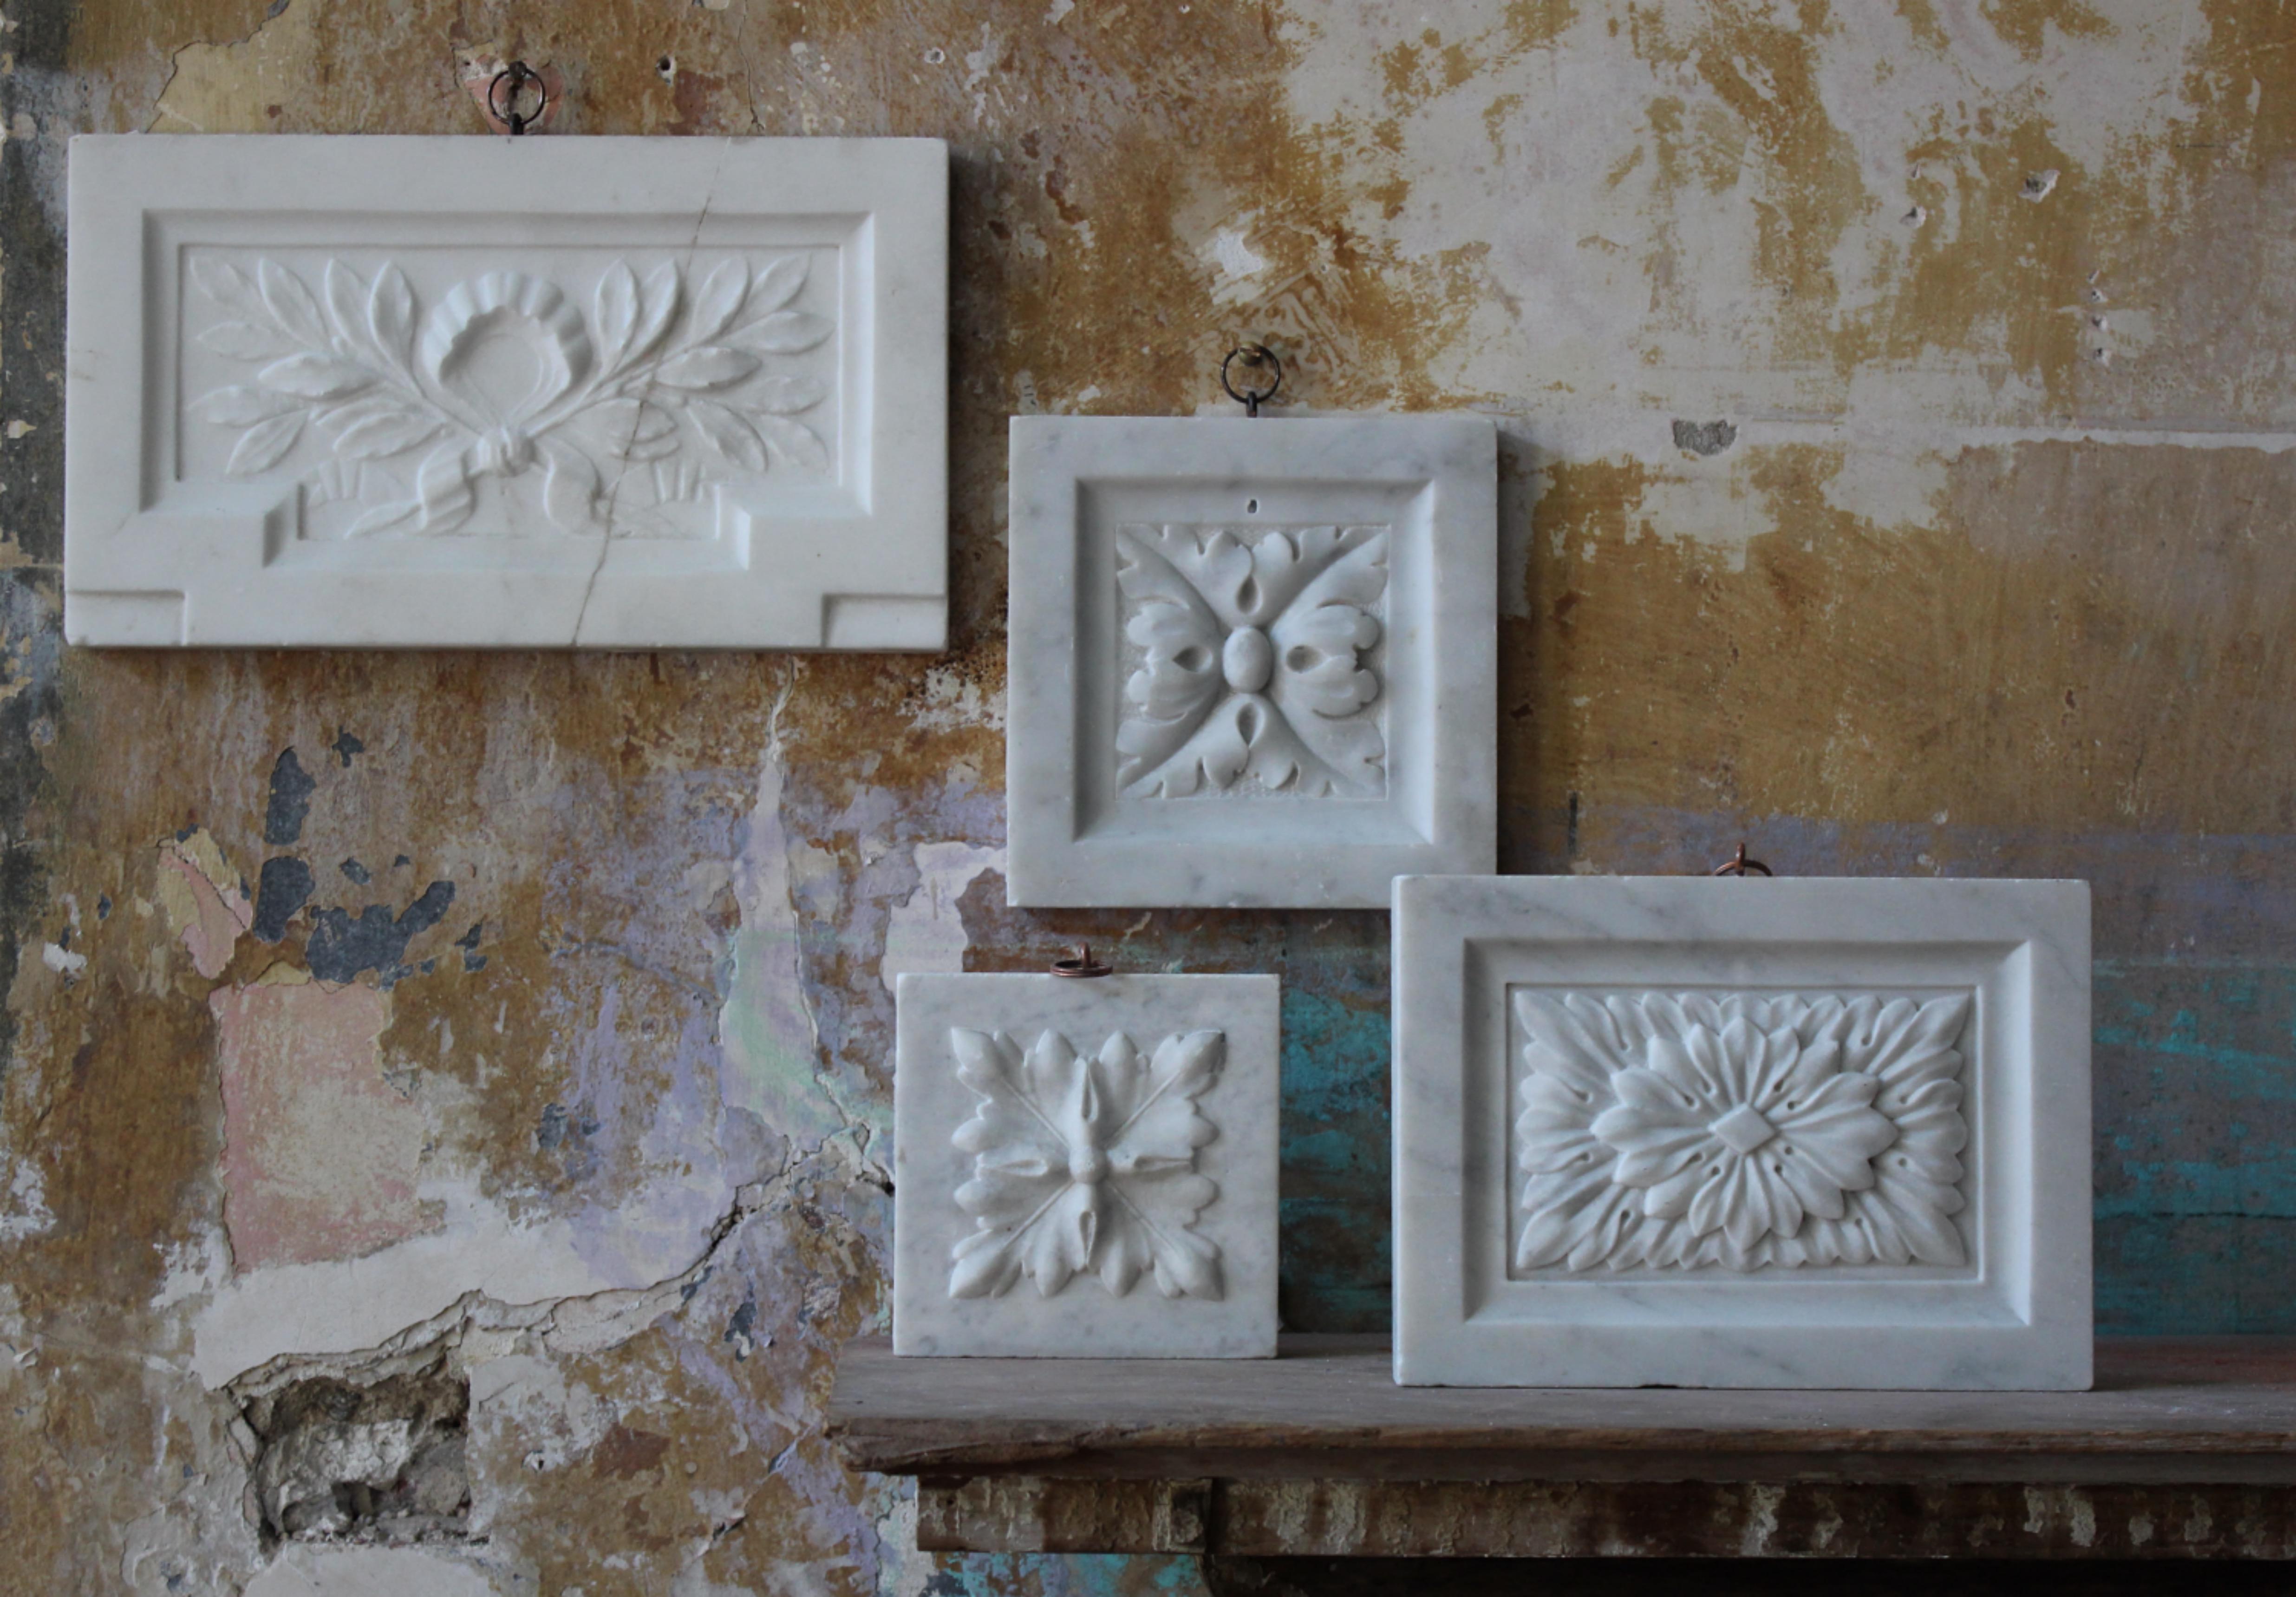 
19th century collection of four hand carved marble tablets with organic following decoration previously part of larger interior architectural feature or fireplace

The sections are extremely well carved, crisp and have a good decorative patina,